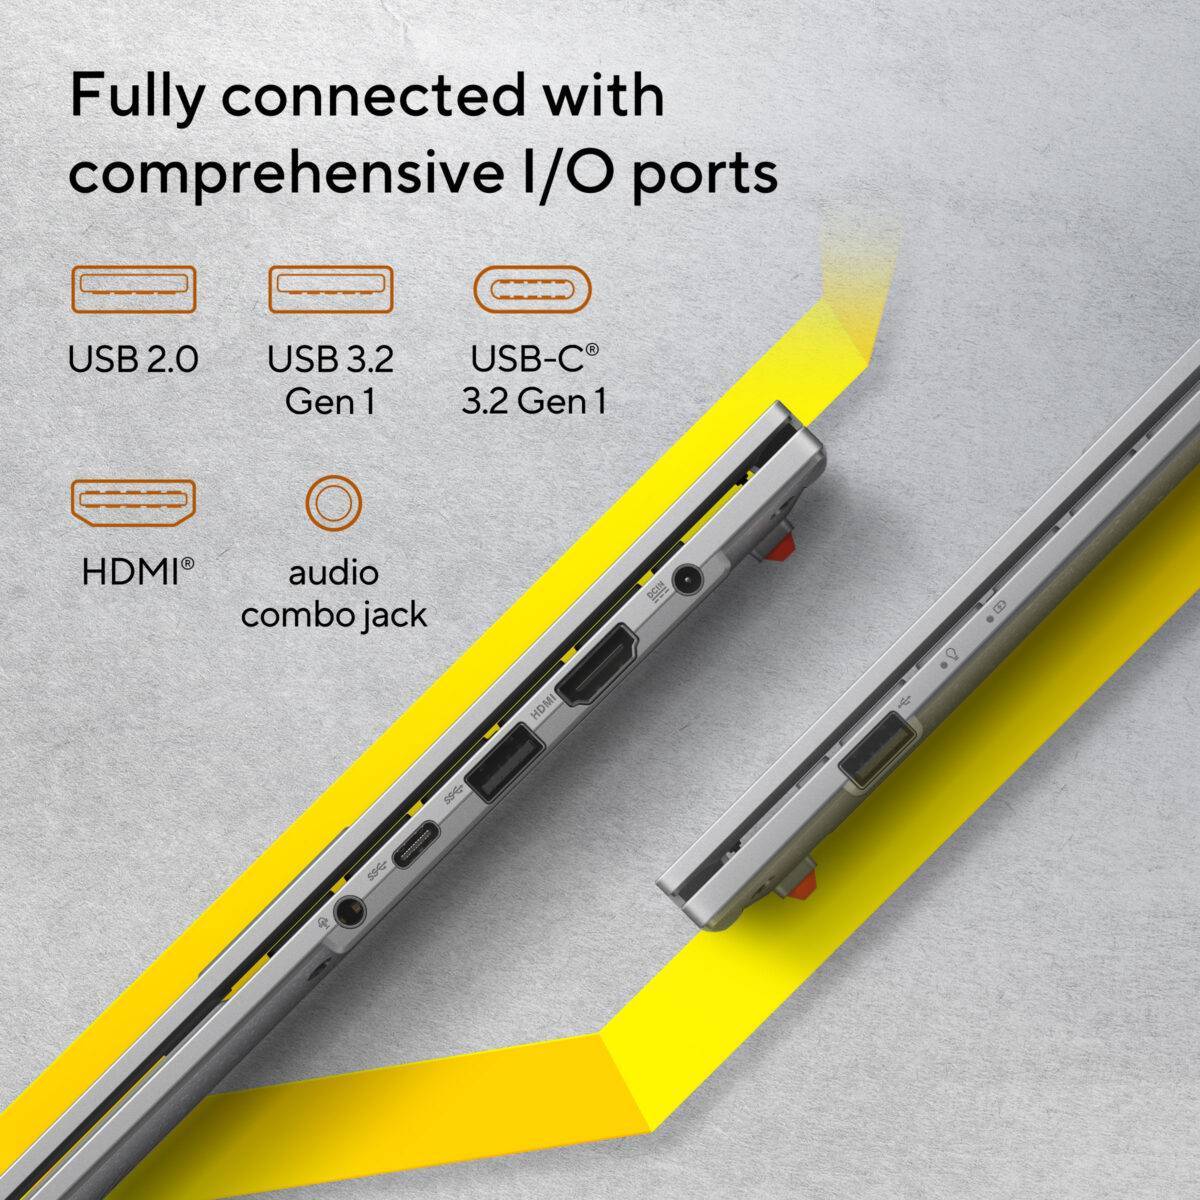 Connectivity Perfect in every detail Vivobook Go 15 OLED keeps you fully connected with its comprehensive I/O ports. There is a USB-C® 3.2 Gen 1 port, a USB 3.2 Gen 1 Type-A port, a USB 2.0 port, HDMI® output and an audio combo jack — so it’s easy to connect all your existing peripherals, displays and projectors.